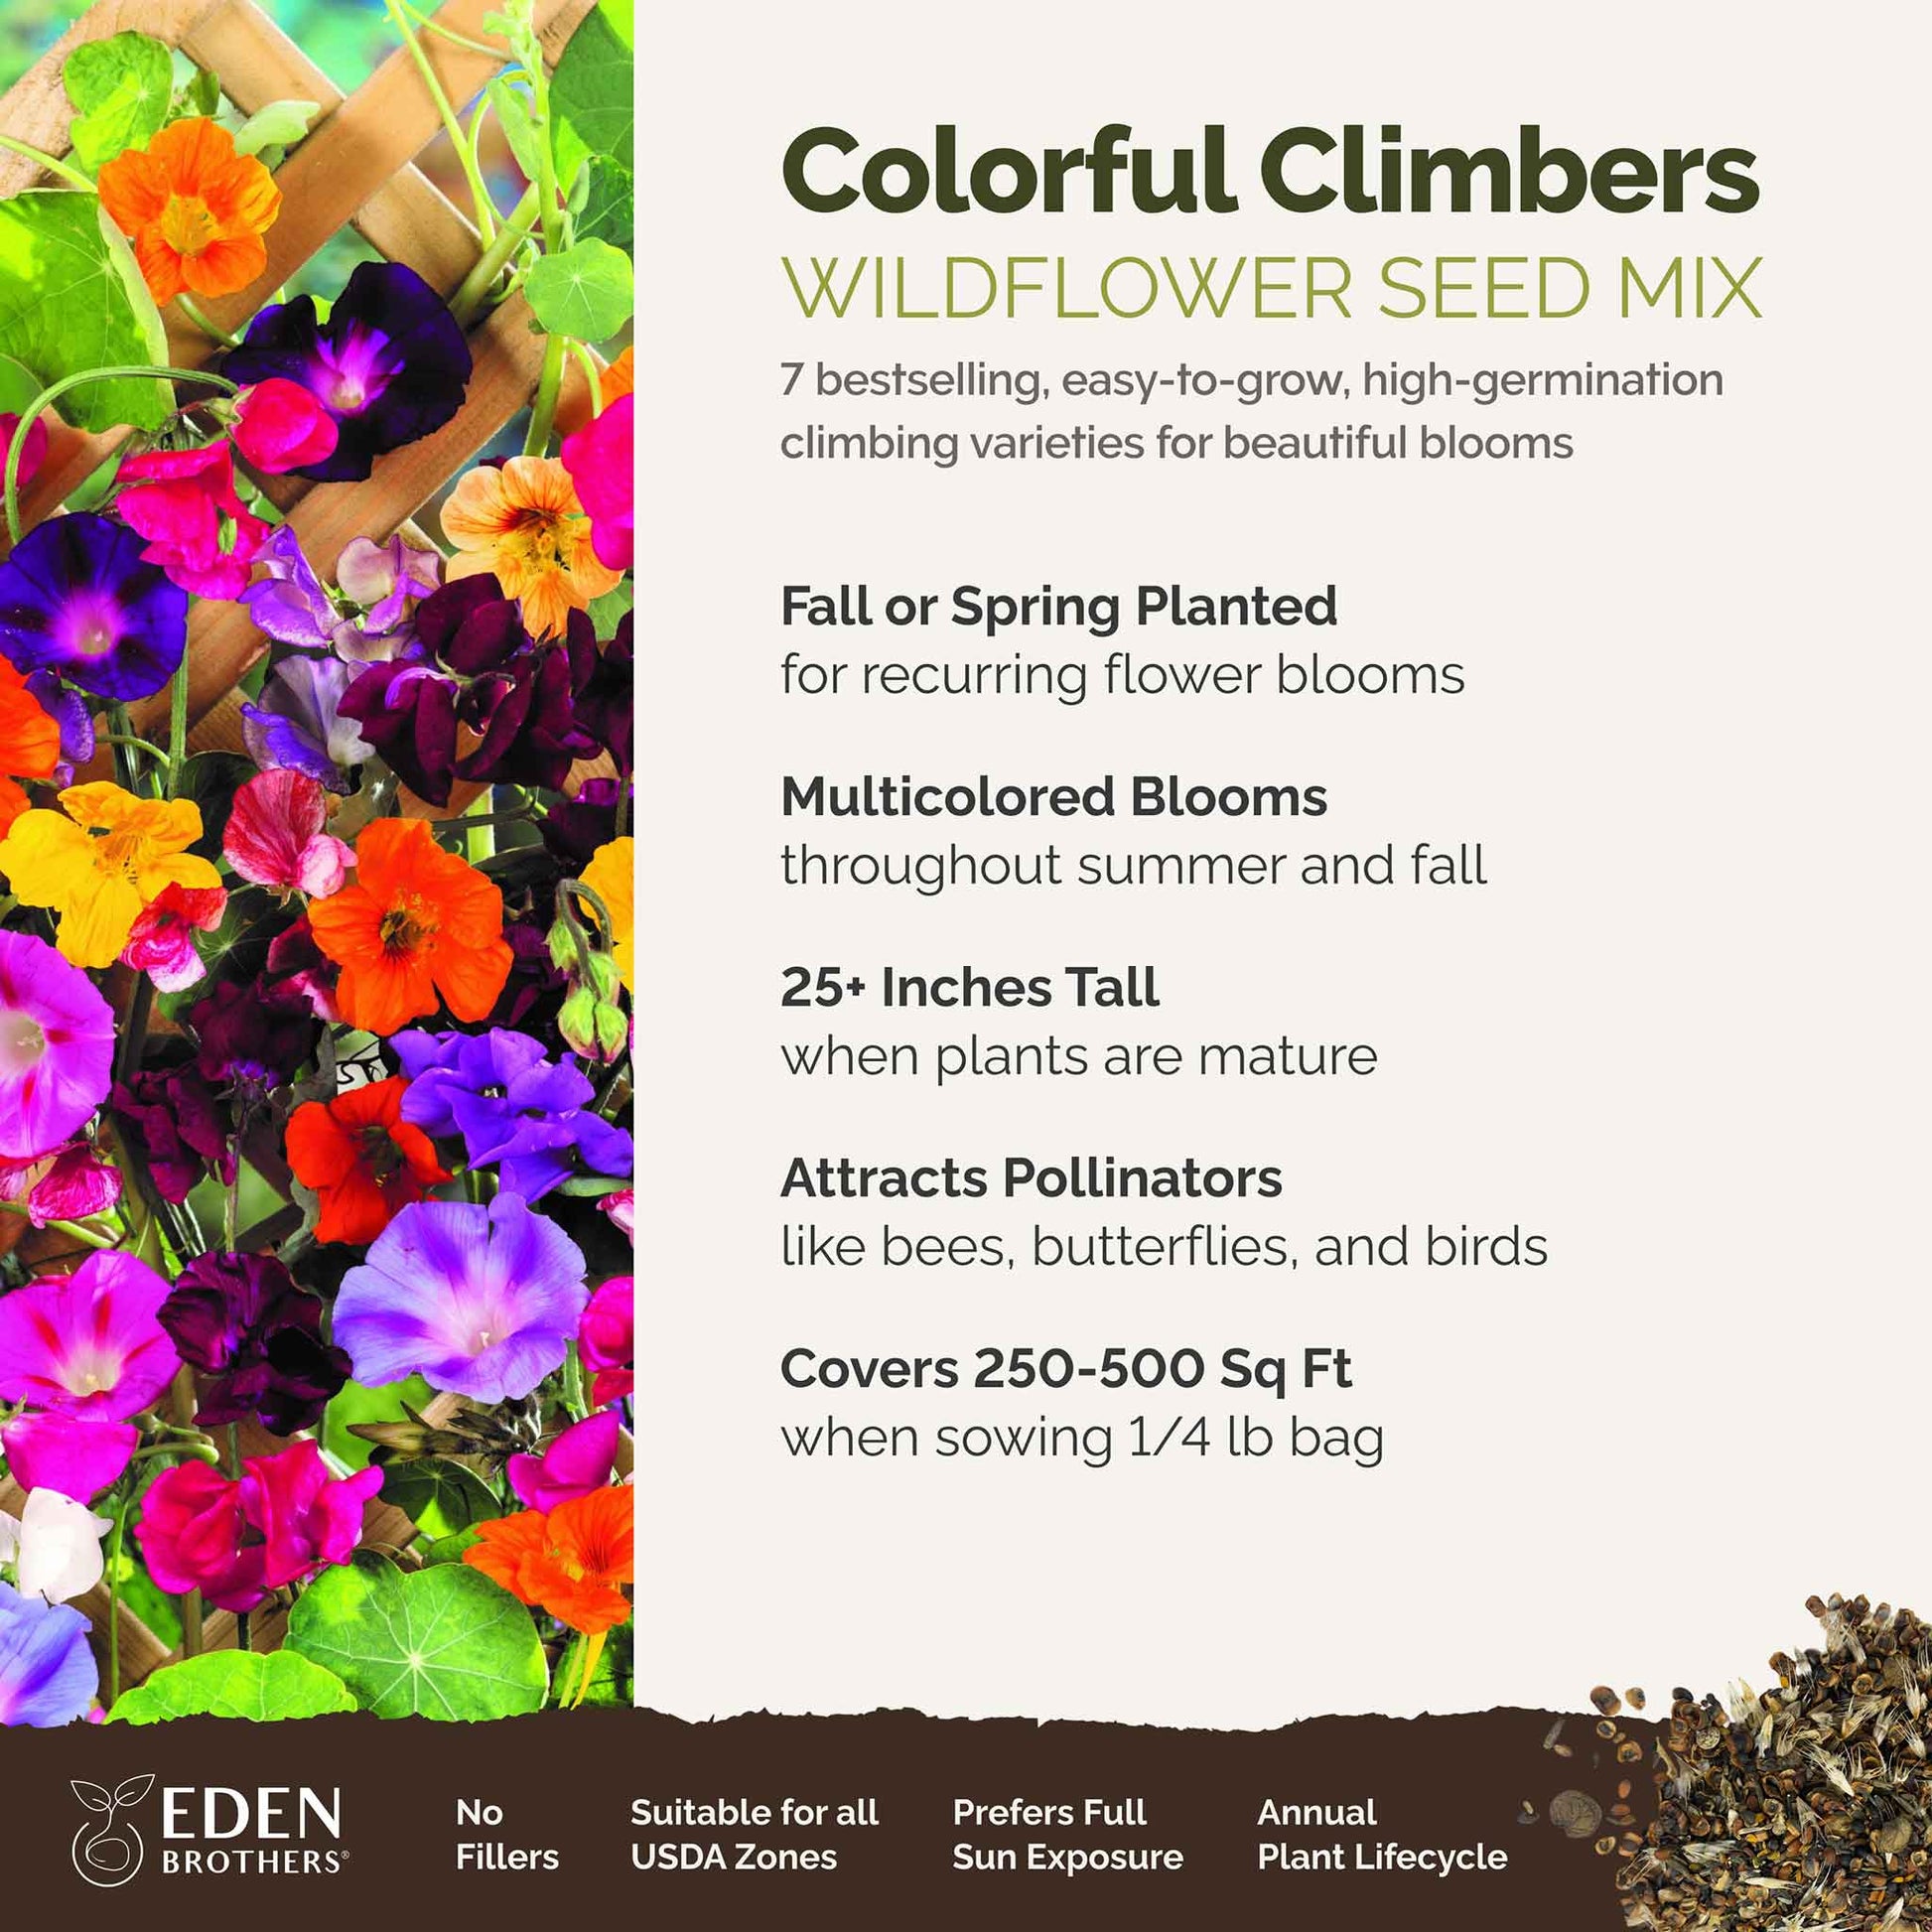 colorful climbers overview